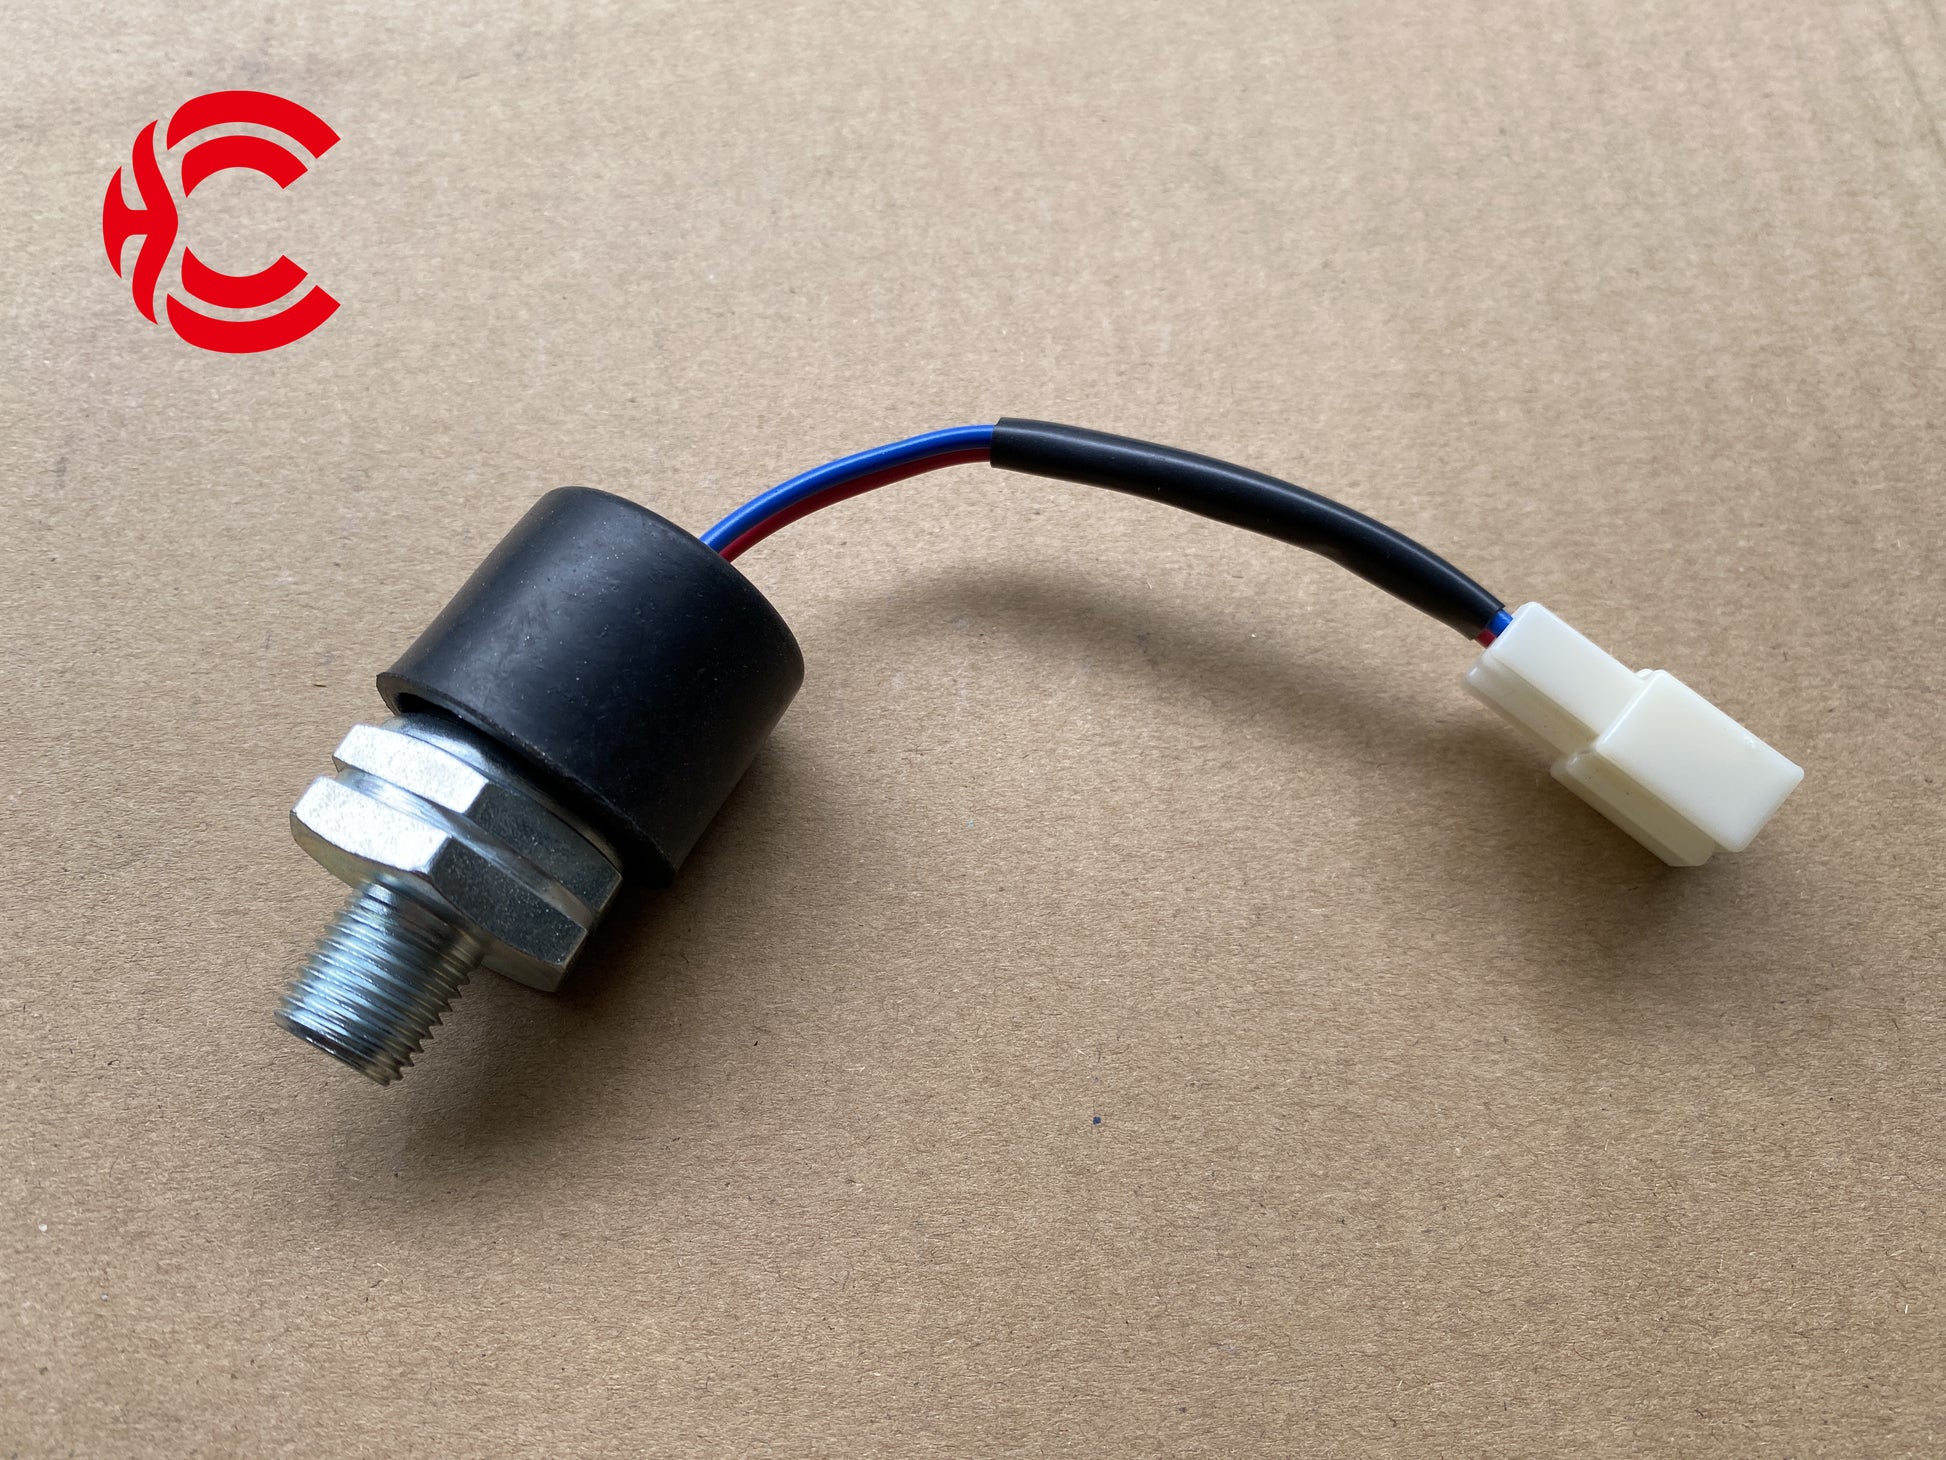 OEM: JK611Q-W NPT1/4Material: ABS metalColor: black silverOrigin: Made in ChinaWeight: 50gPacking List: 1* Brake Light Switch More ServiceWe can provide OEM Manufacturing serviceWe can Be your one-step solution for Auto PartsWe can provide technical scheme for you Feel Free to Contact Us, We will get back to you as soon as possible.